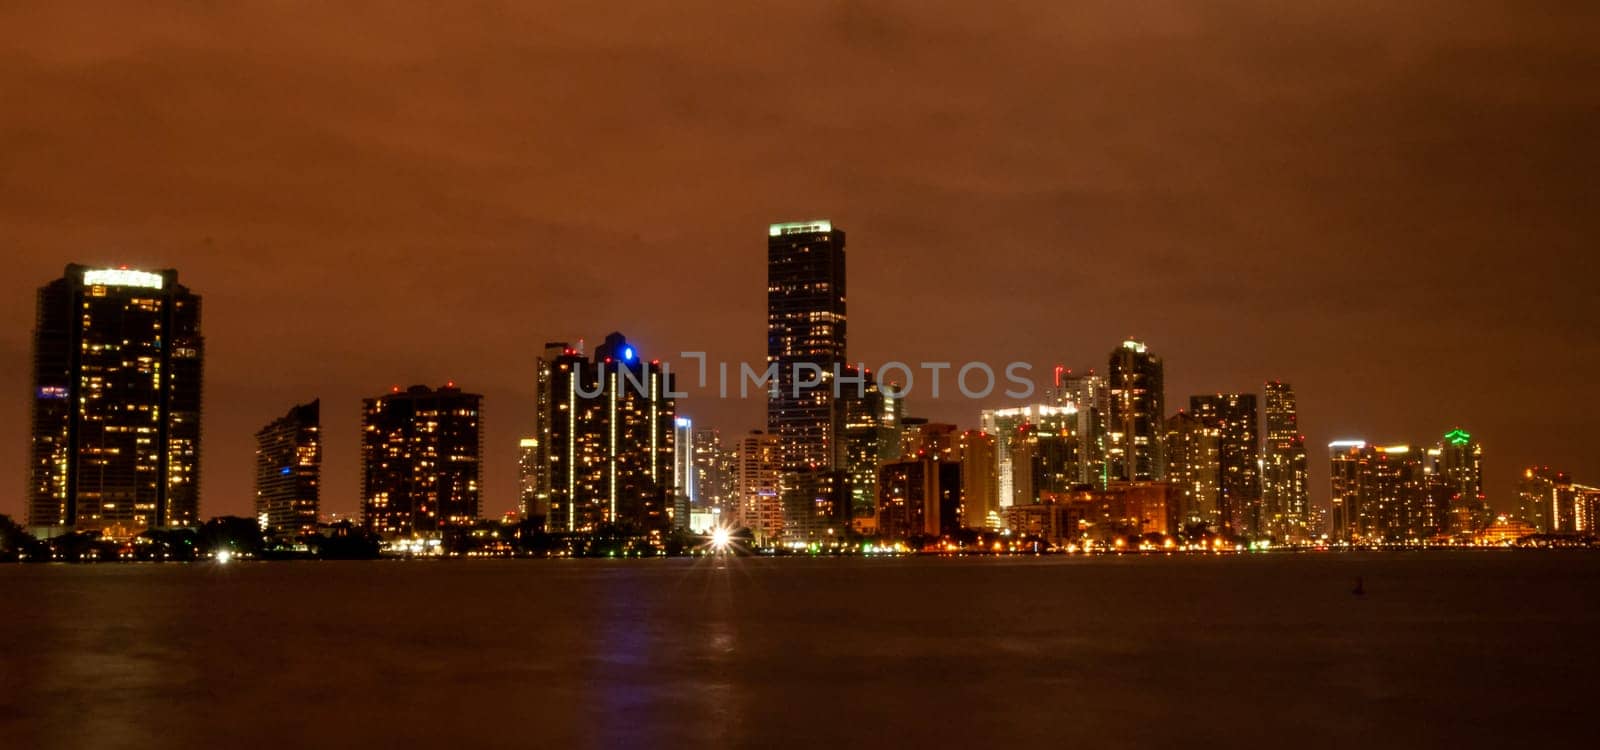 view of the night glowing city on the coast of the Gulf of Mexico, Florida by Hydrobiolog